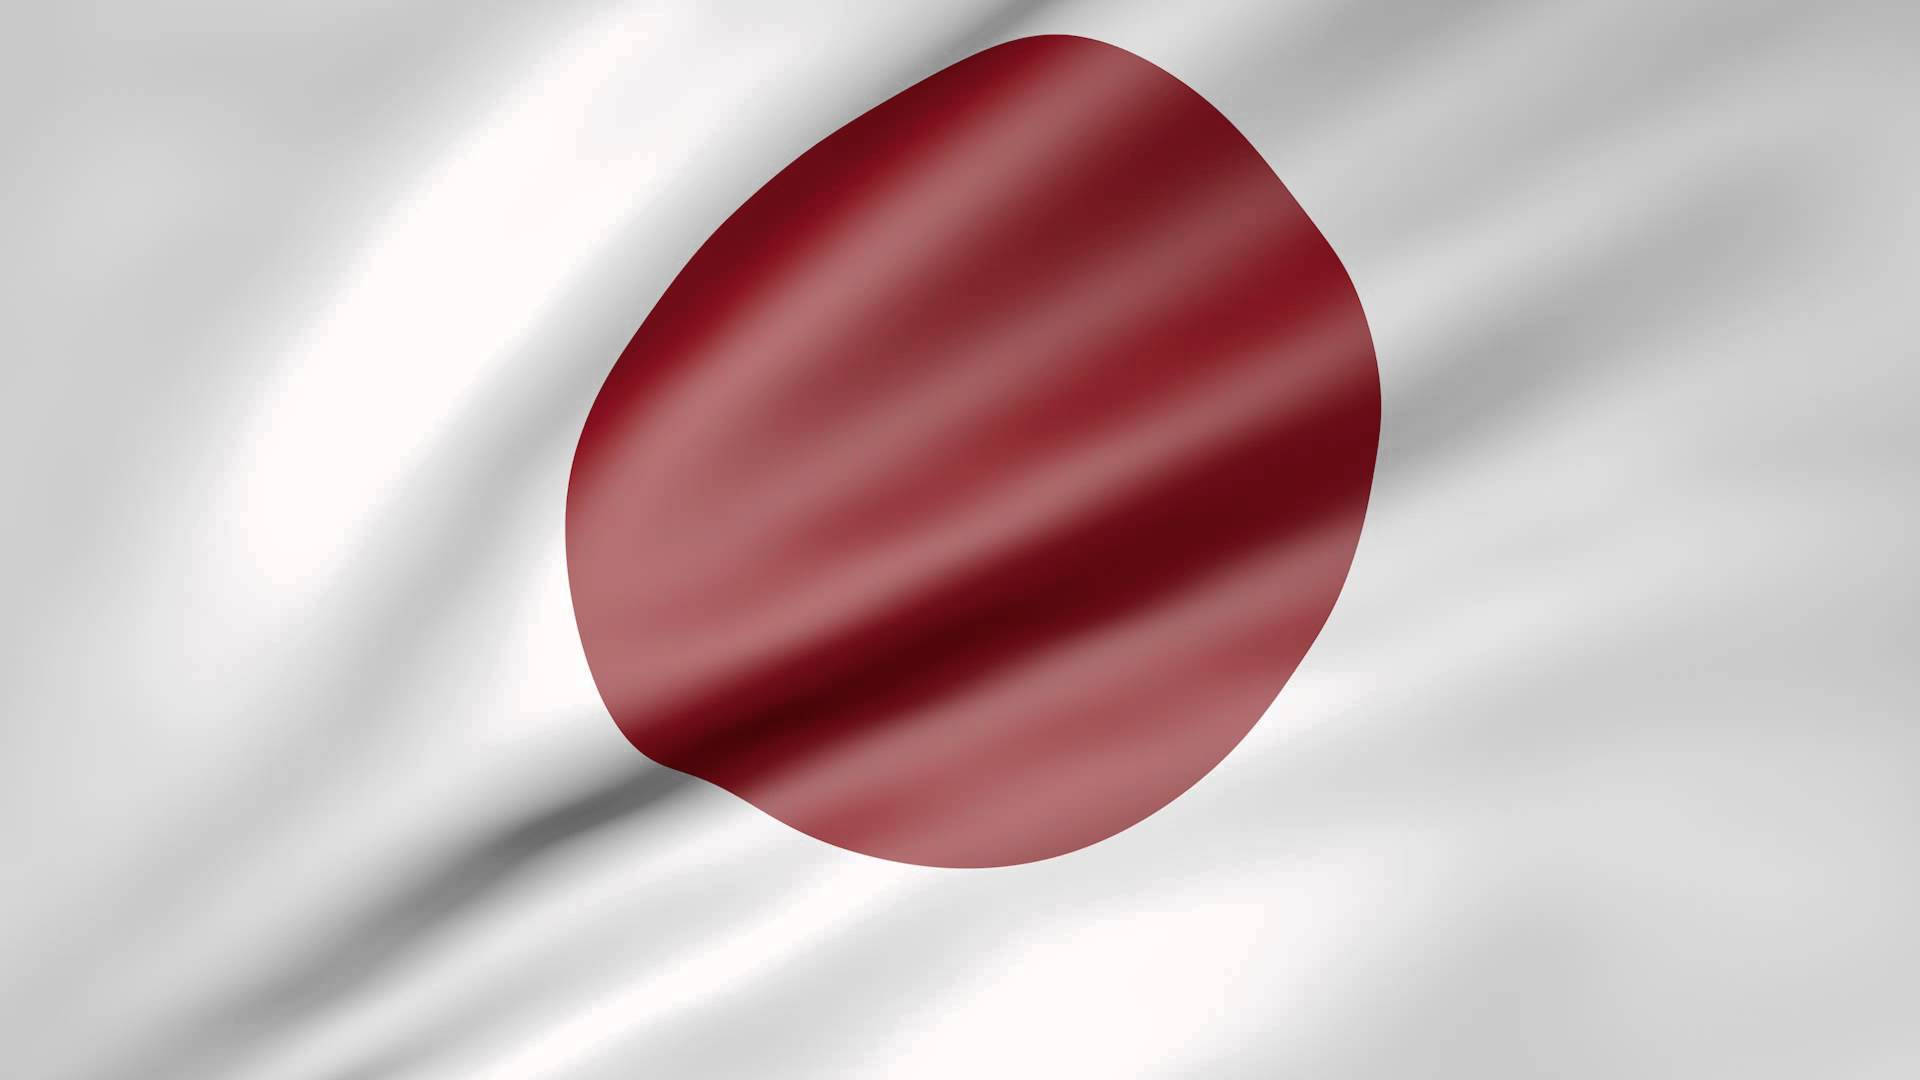 Caption: Waving Glory - Magnificent Japan National Flag Background